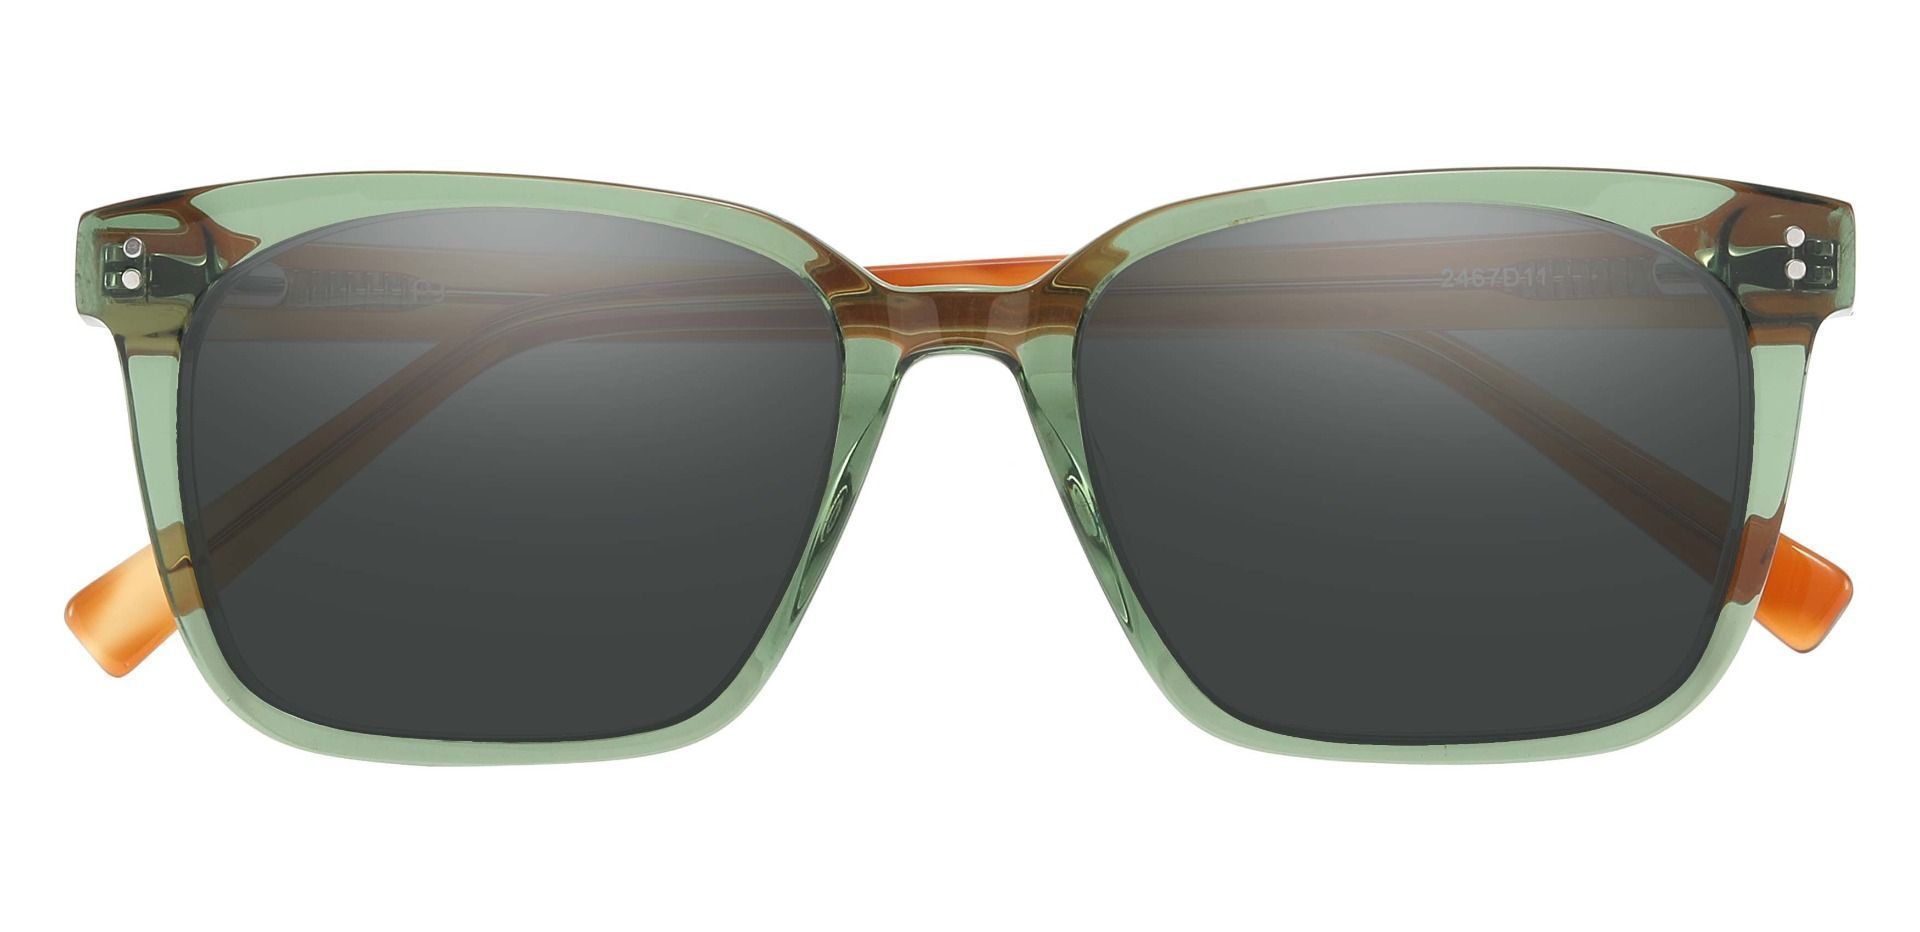 Apex Rectangle Non-Rx Sunglasses - Green Frame With Gray Lenses